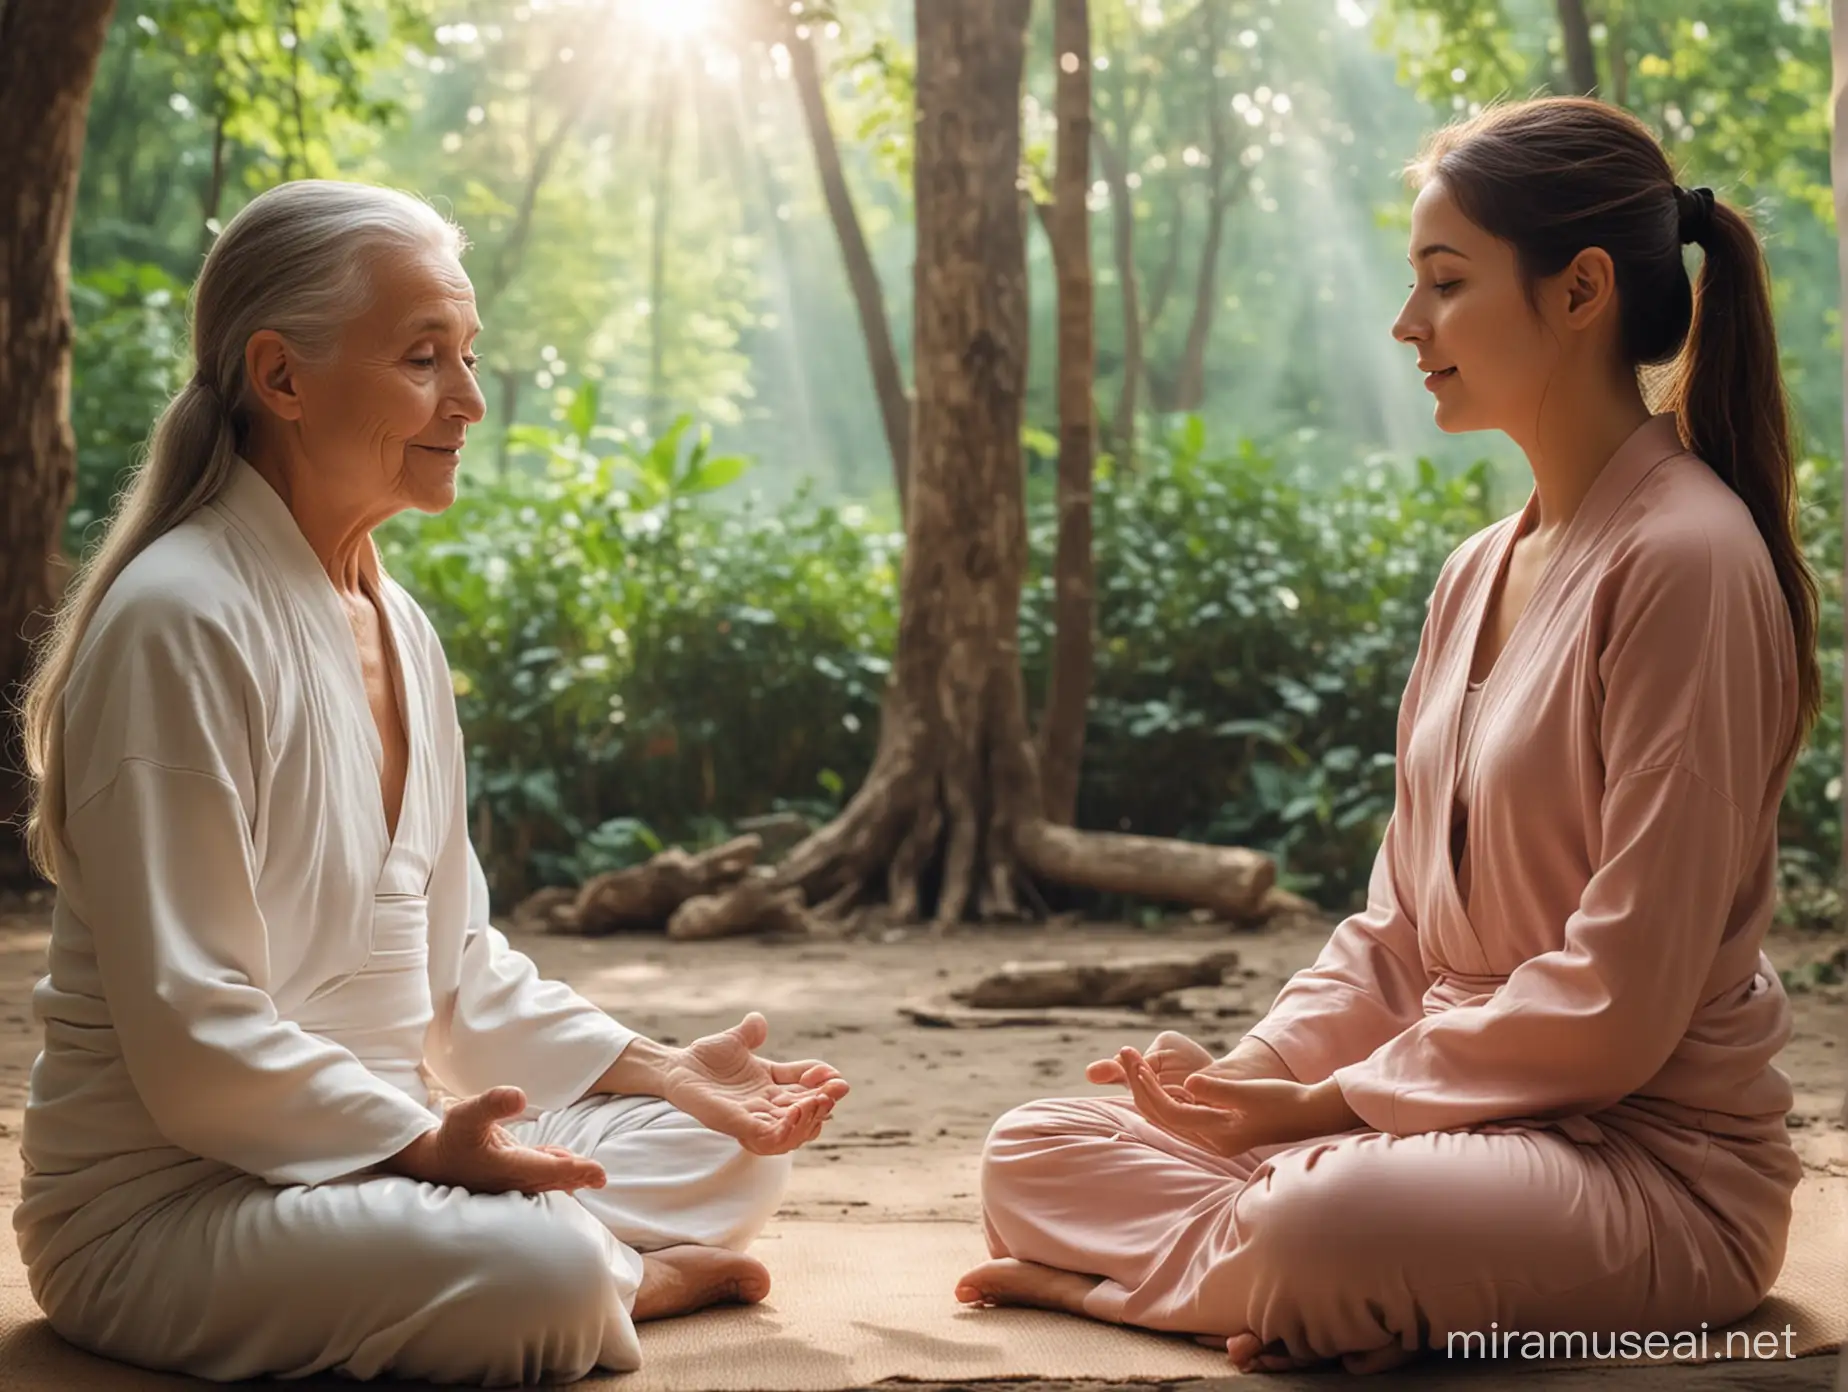 Serene Encounter Young Woman Conversing with Elderly Meditation Master in a Picturesque Setting